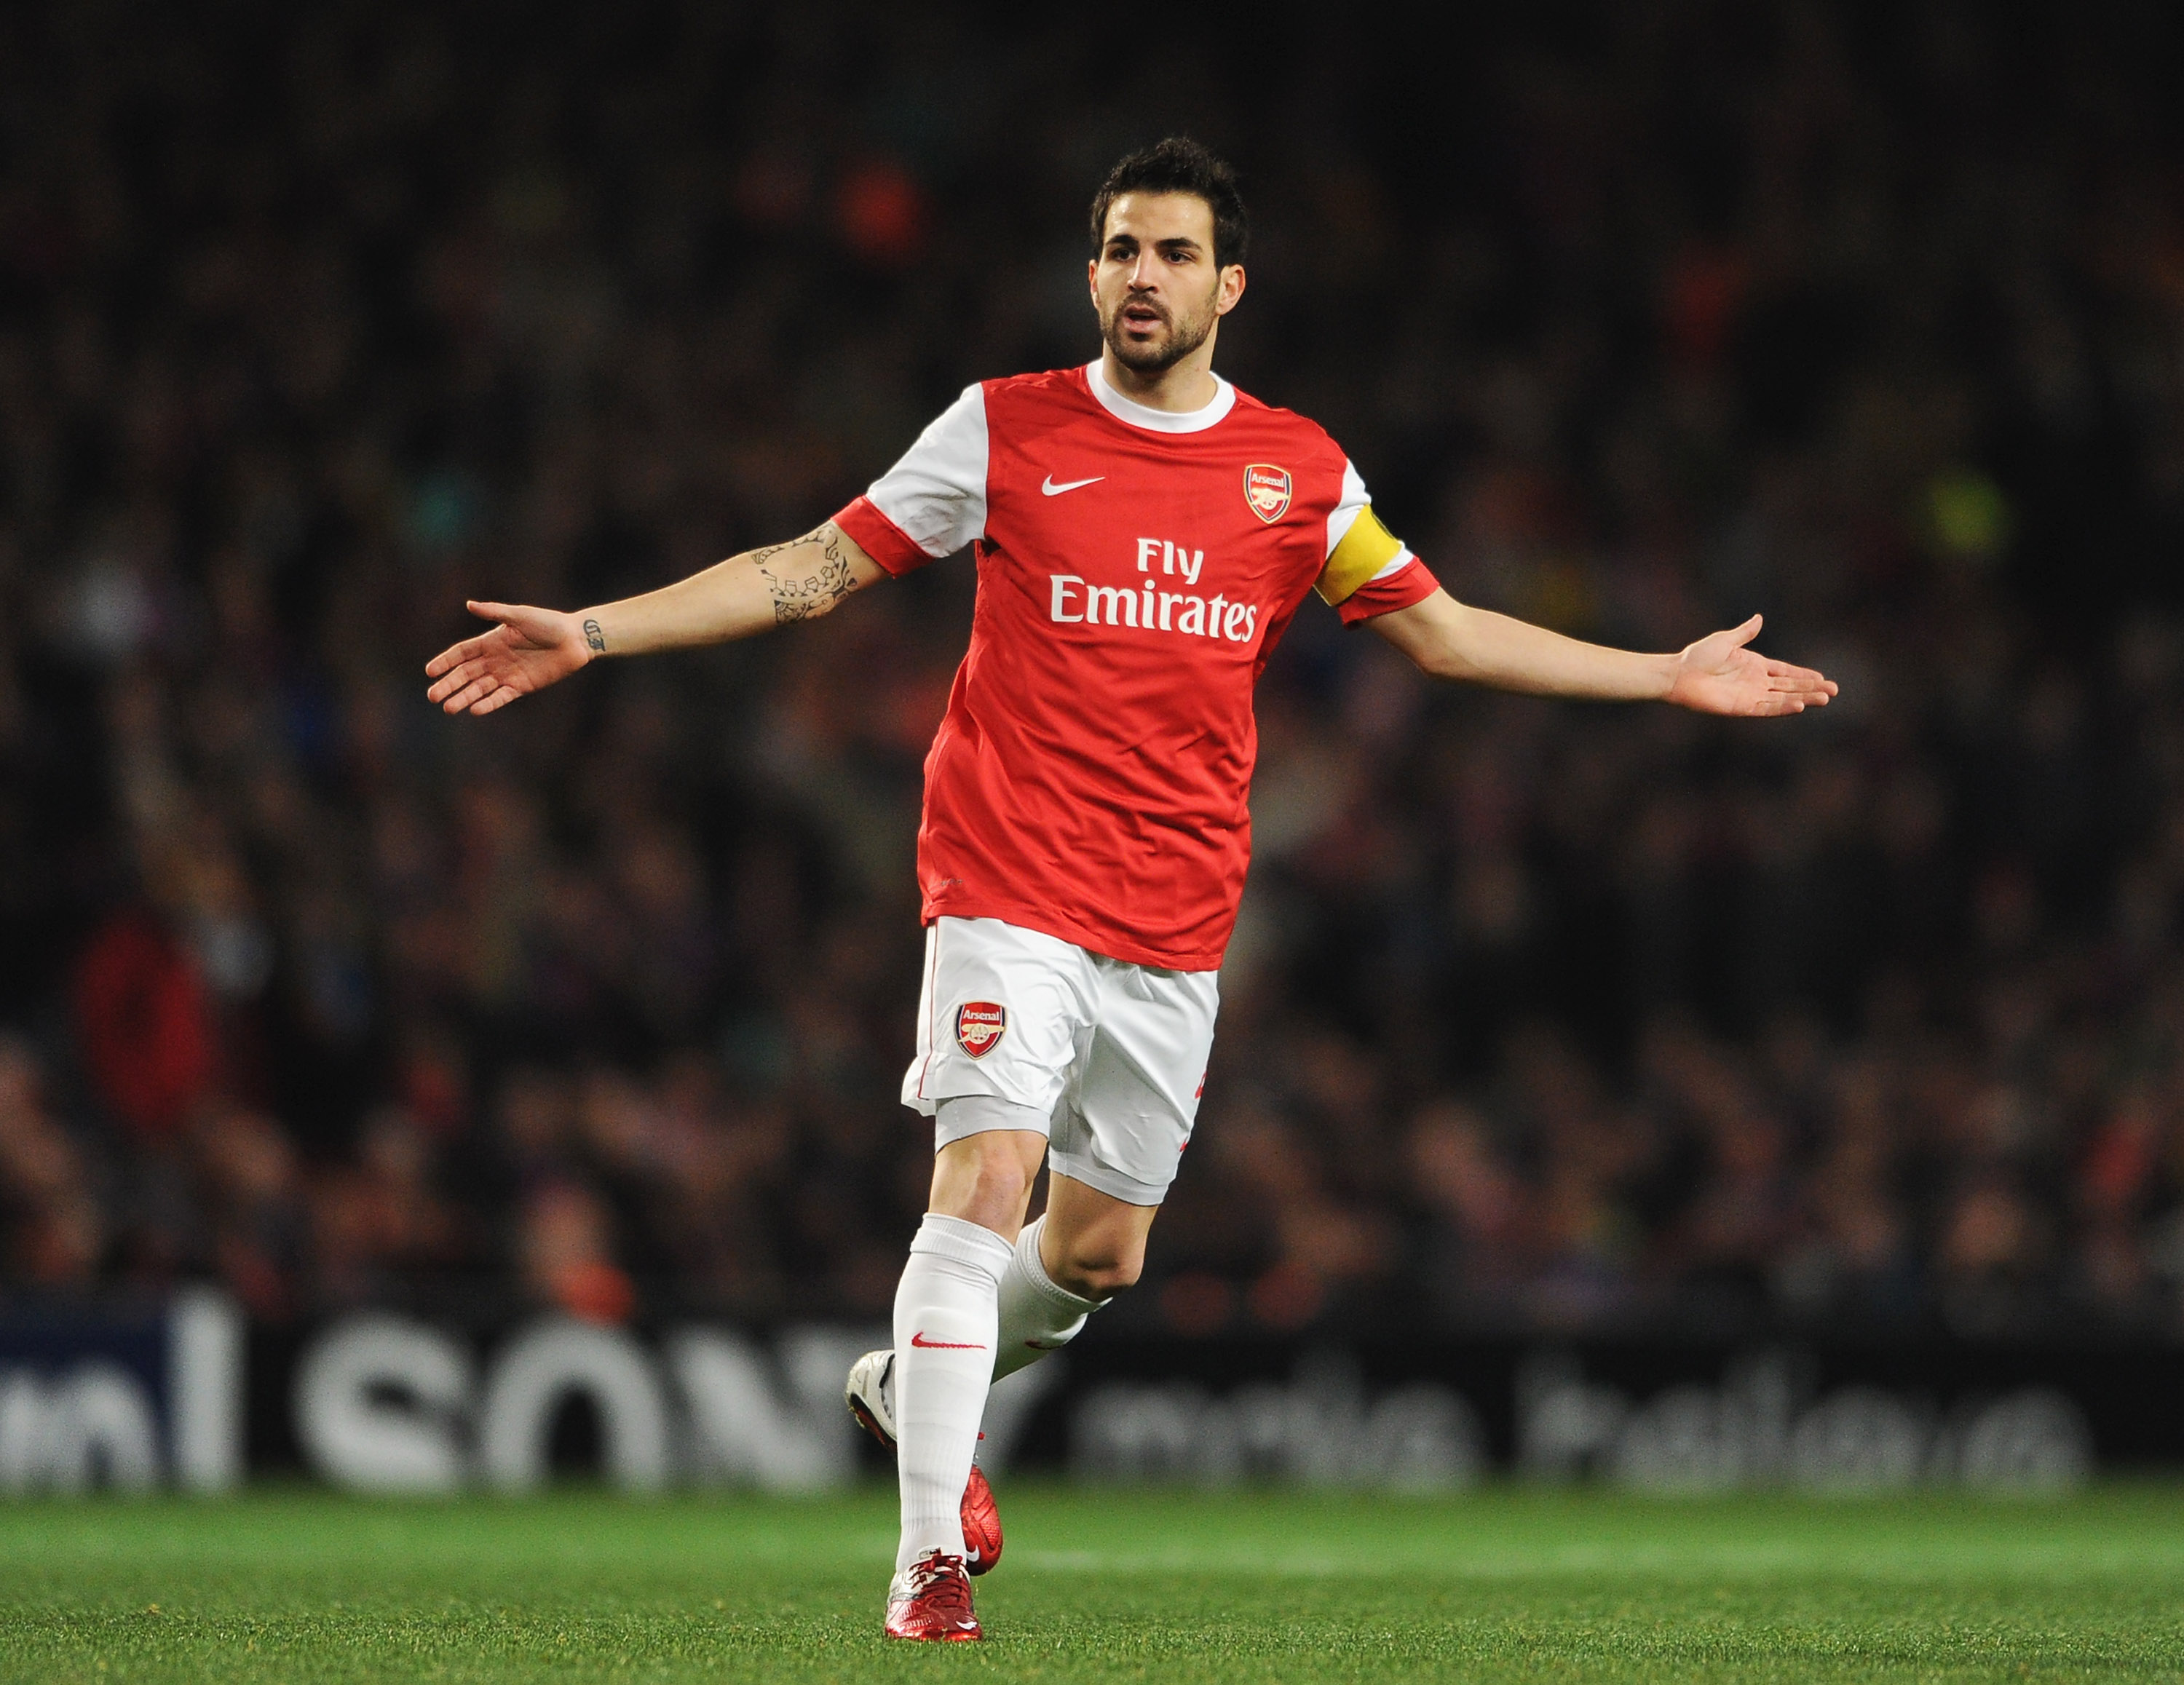 LONDON, ENGLAND - FEBRUARY 16:  Cesc Fabregas of Arsenal shows his frustration during the UEFA Champions League round of 16 first leg match between Arsenal and Barcelona at the Emirates Stadium on February 16, 2011 in London, England.  (Photo by Jasper Ju